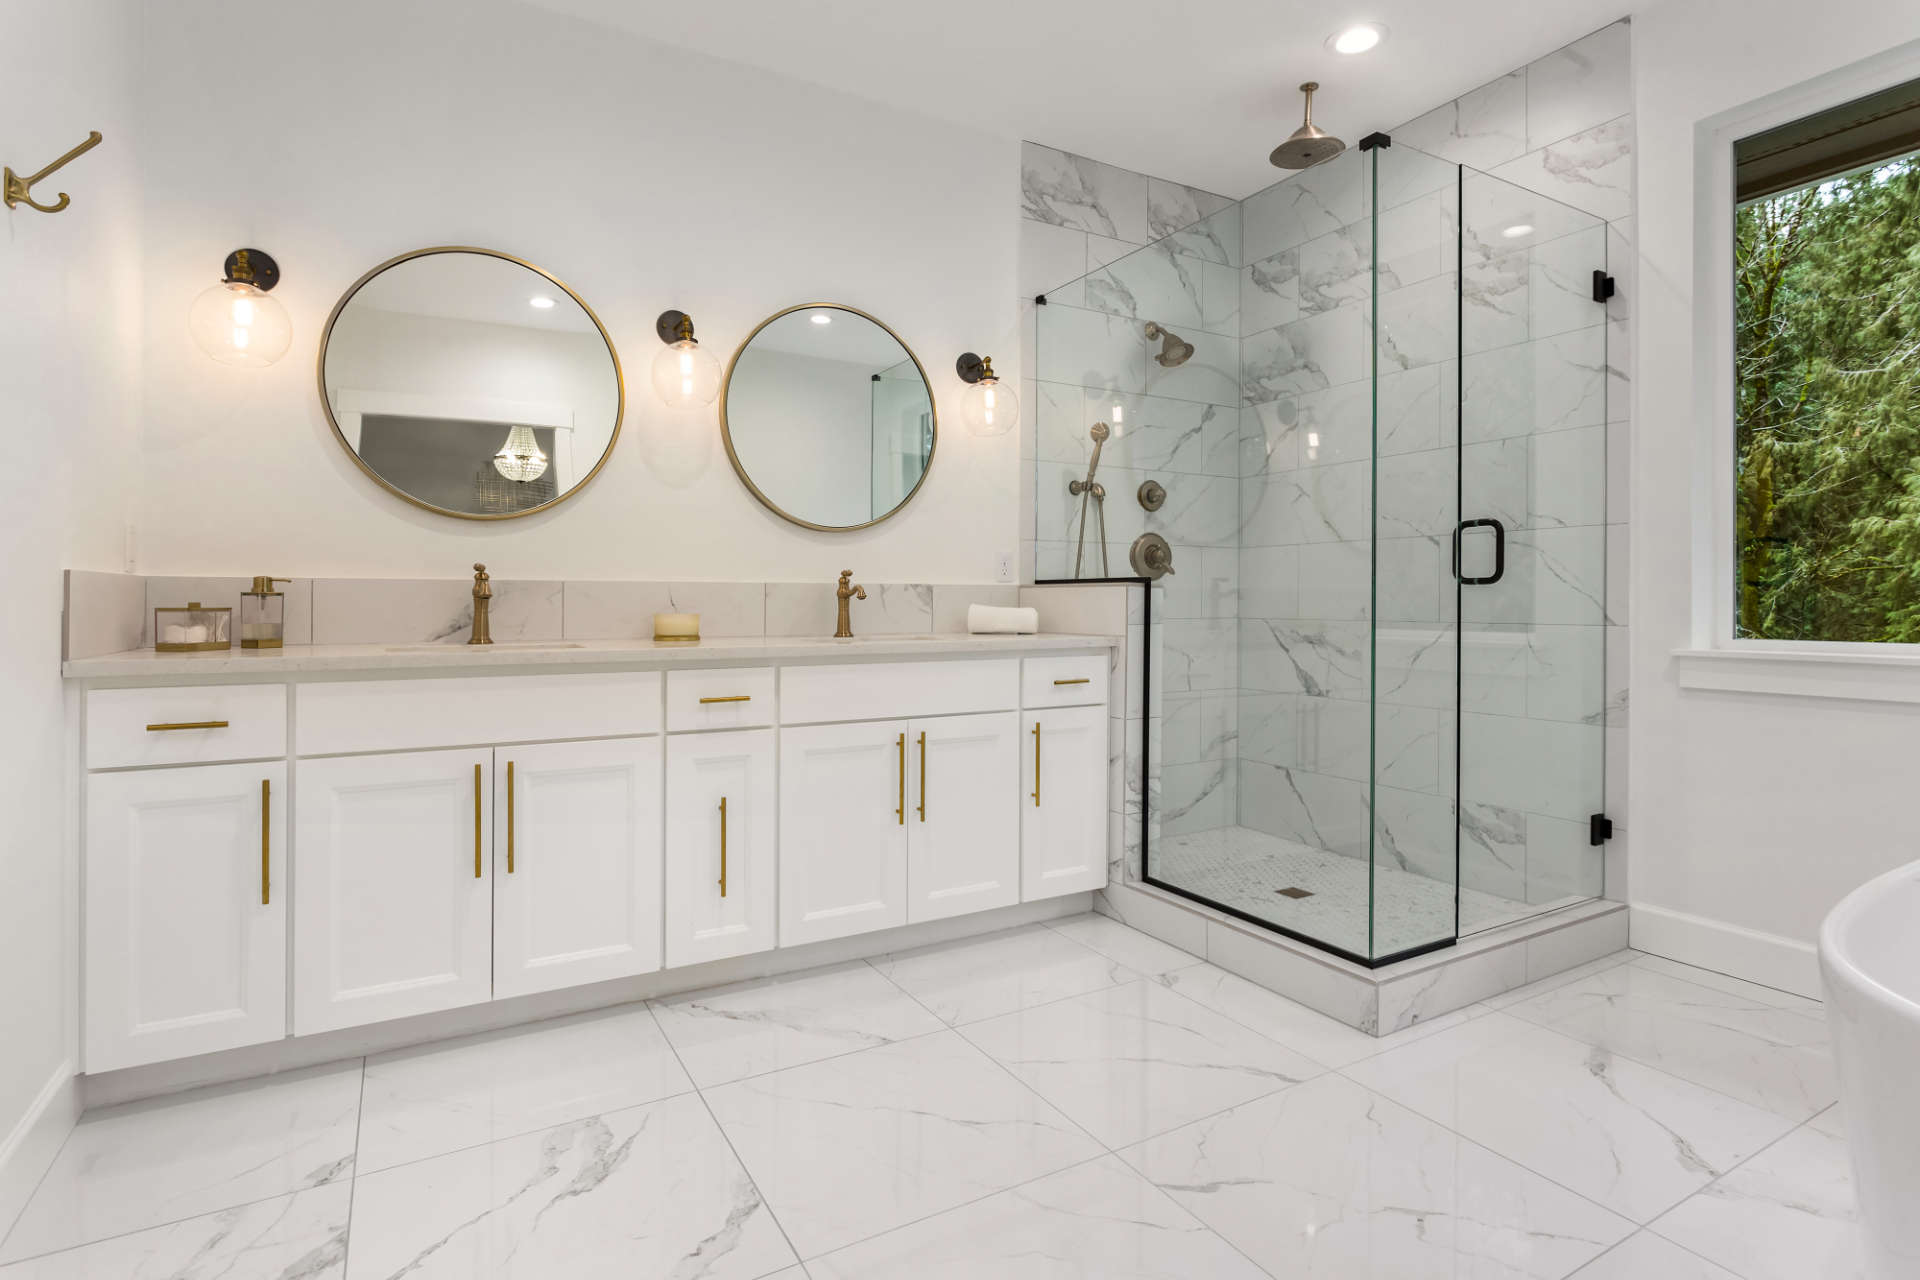 5 things householders don’t take into account when renovating a bathroom.